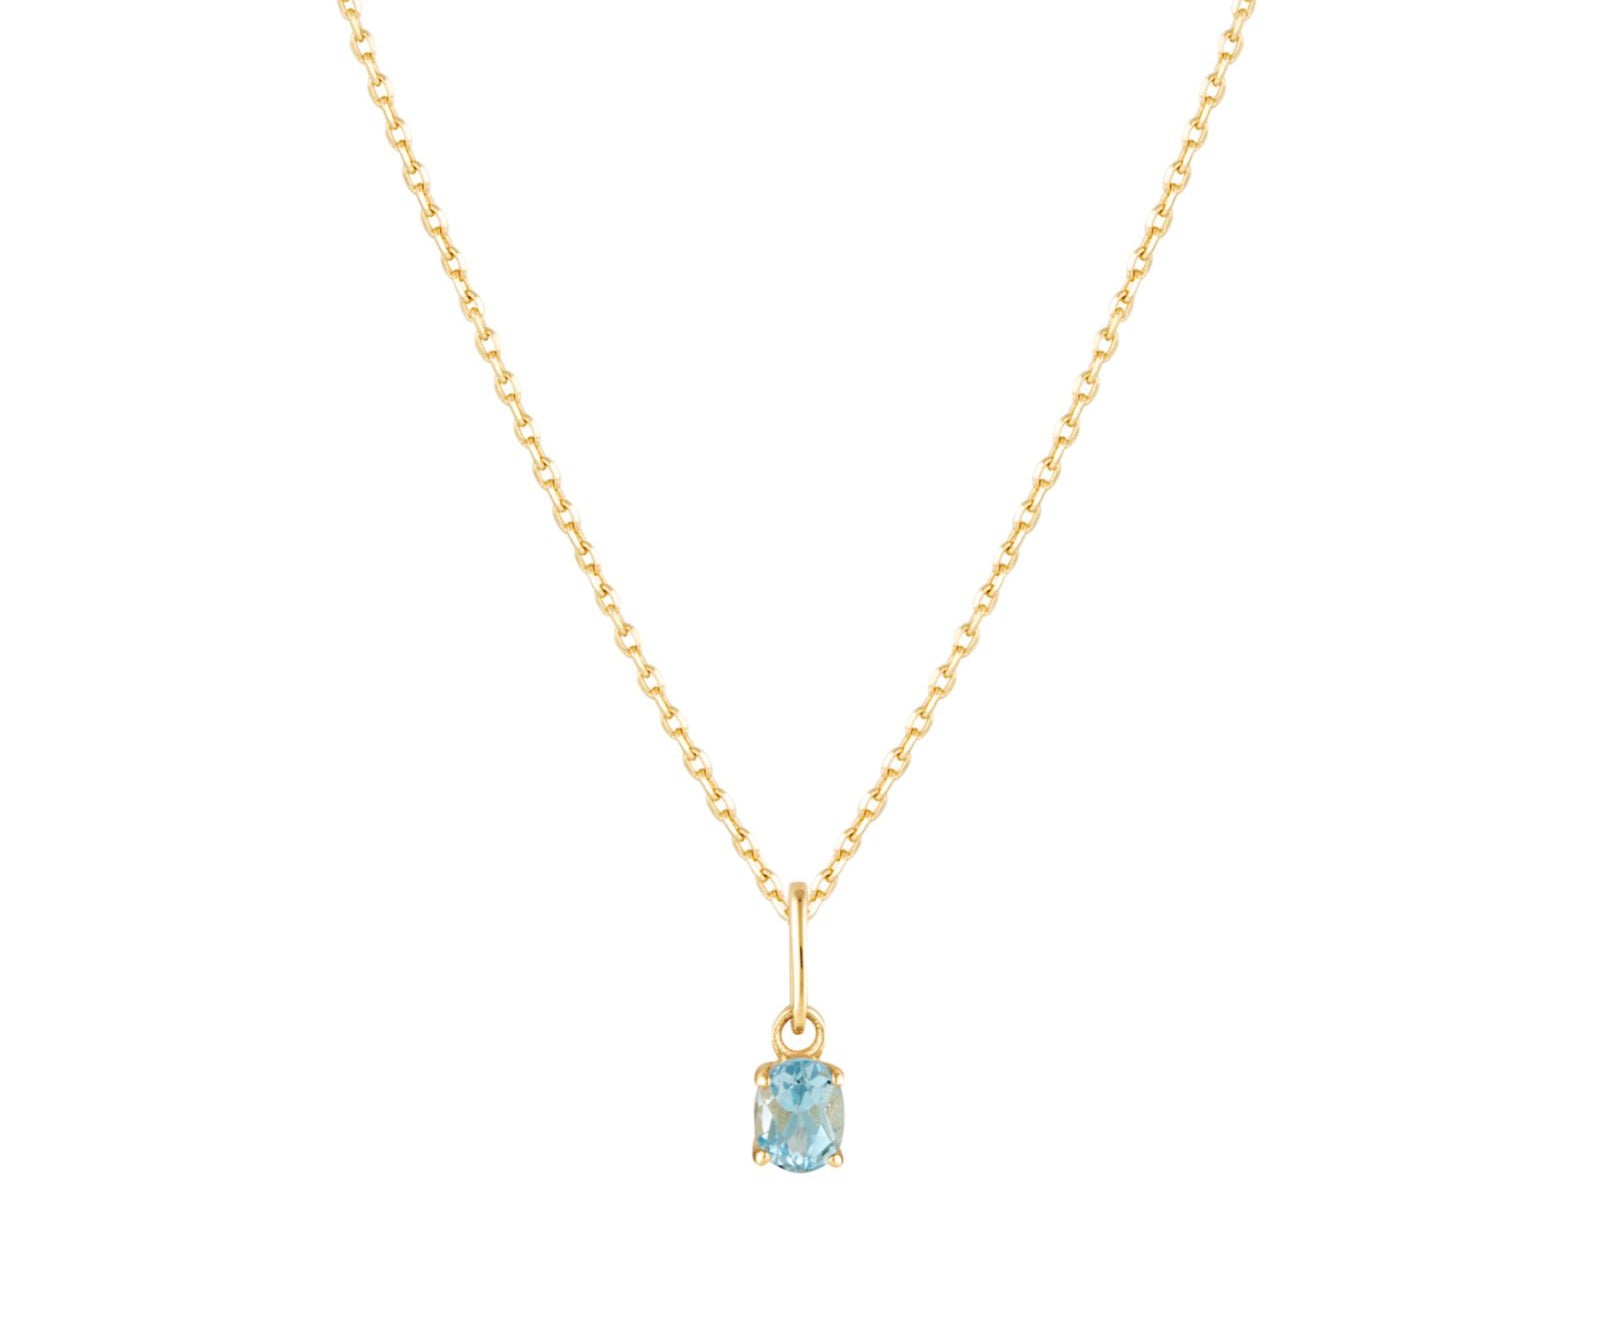 Picture of Luna Rae Solid 9k Gold Topaz Necklace